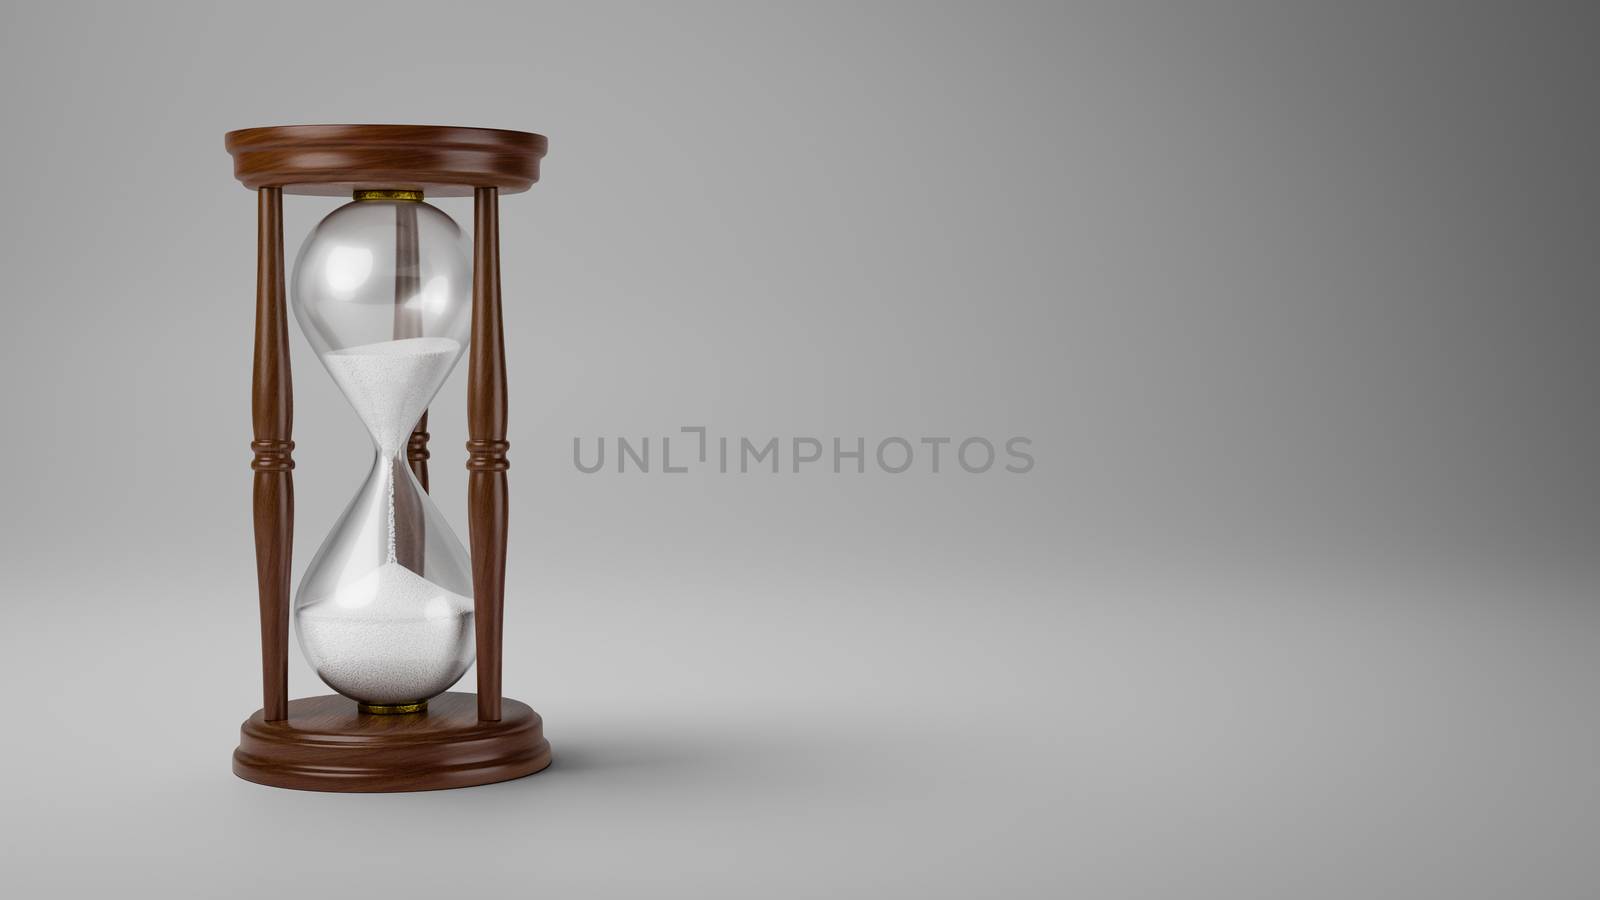 Classic Wooden Hourglass with White Sand on Gray Background with Copyspace Studio Shot 3D Illustration